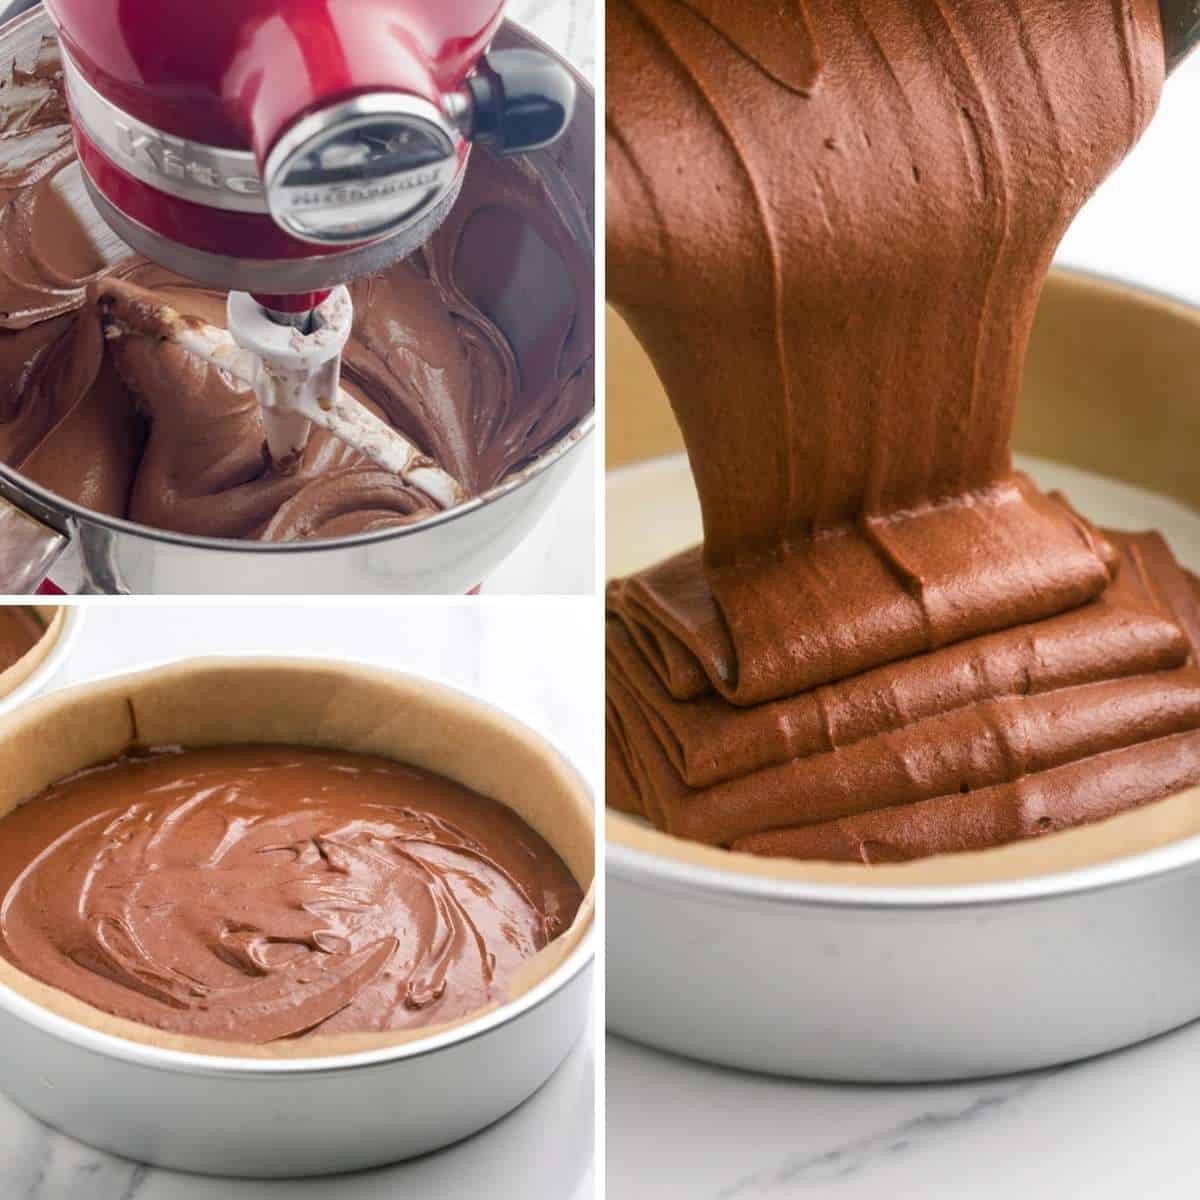 Collage of three images showing how to bake a chocolate cake.